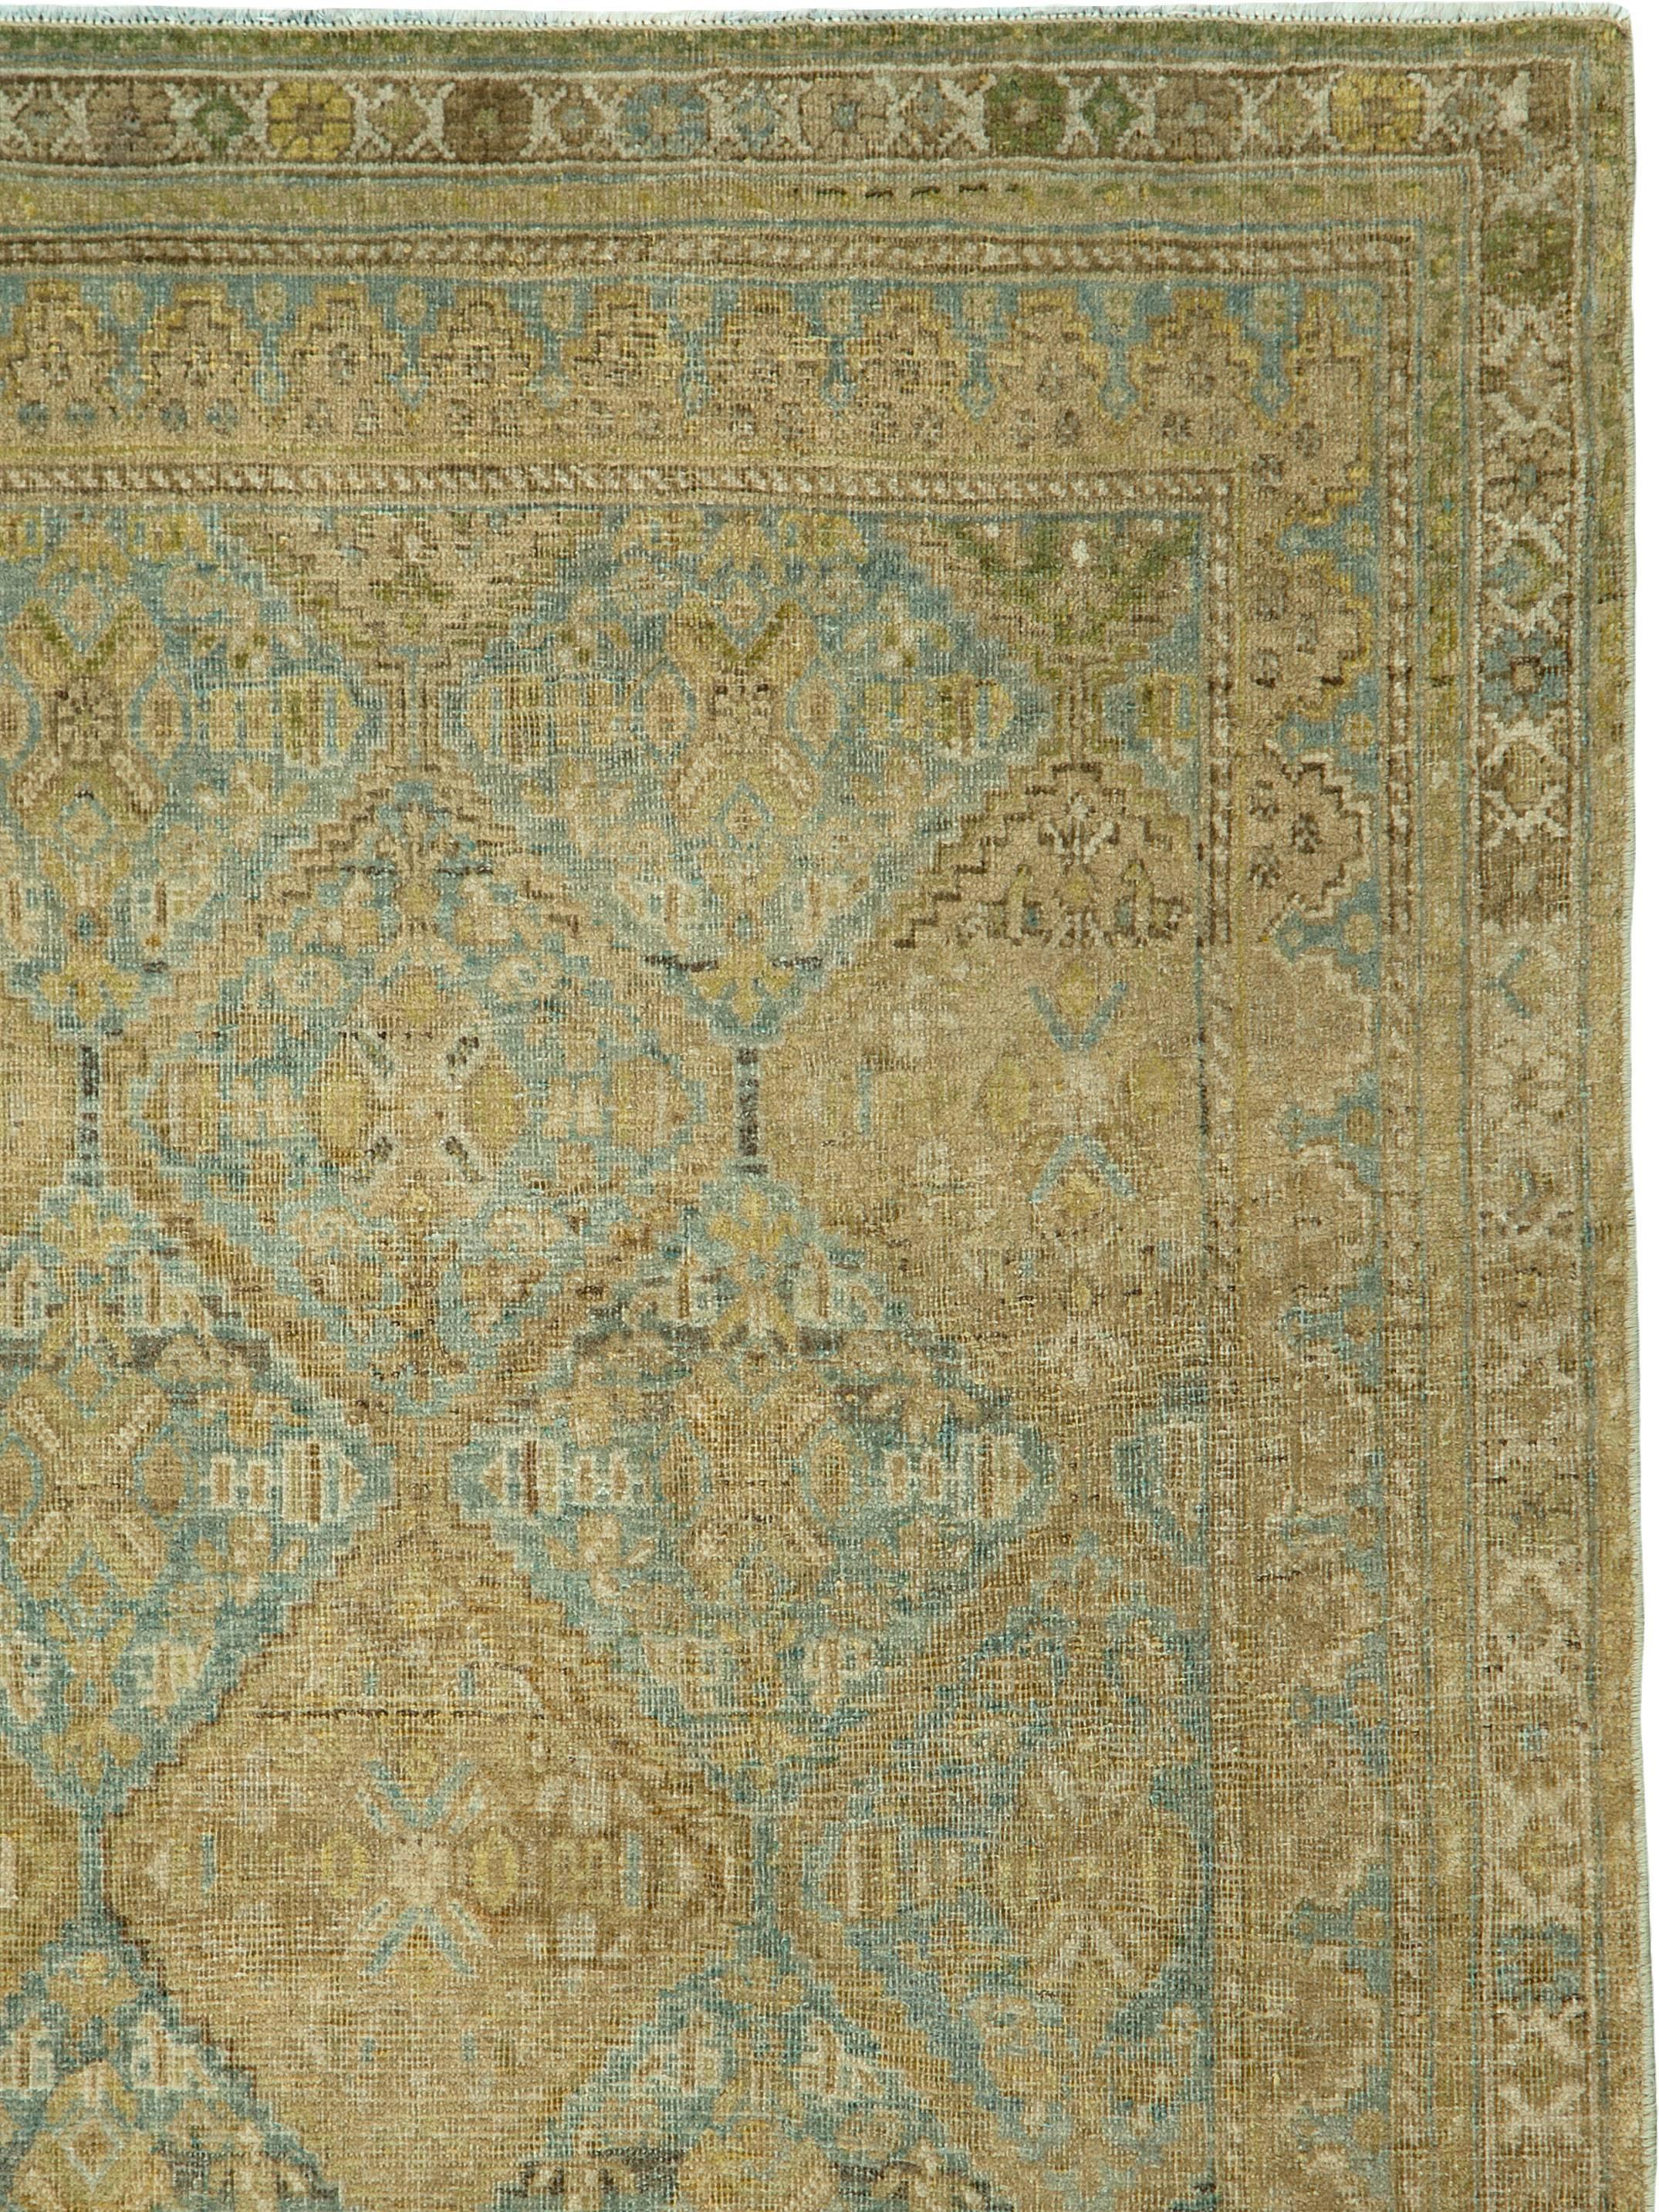 An antique Persian Afshar carpet from the first quarter of the 20th century.